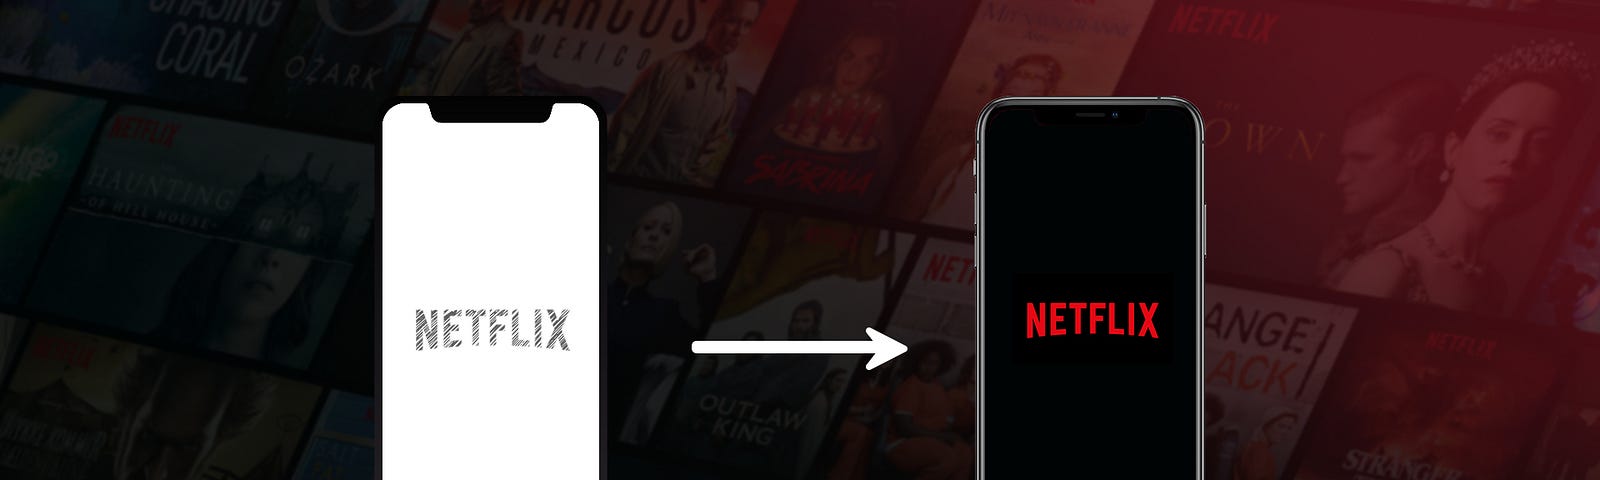 how to build a streaming platform like netflix, create your own netflix